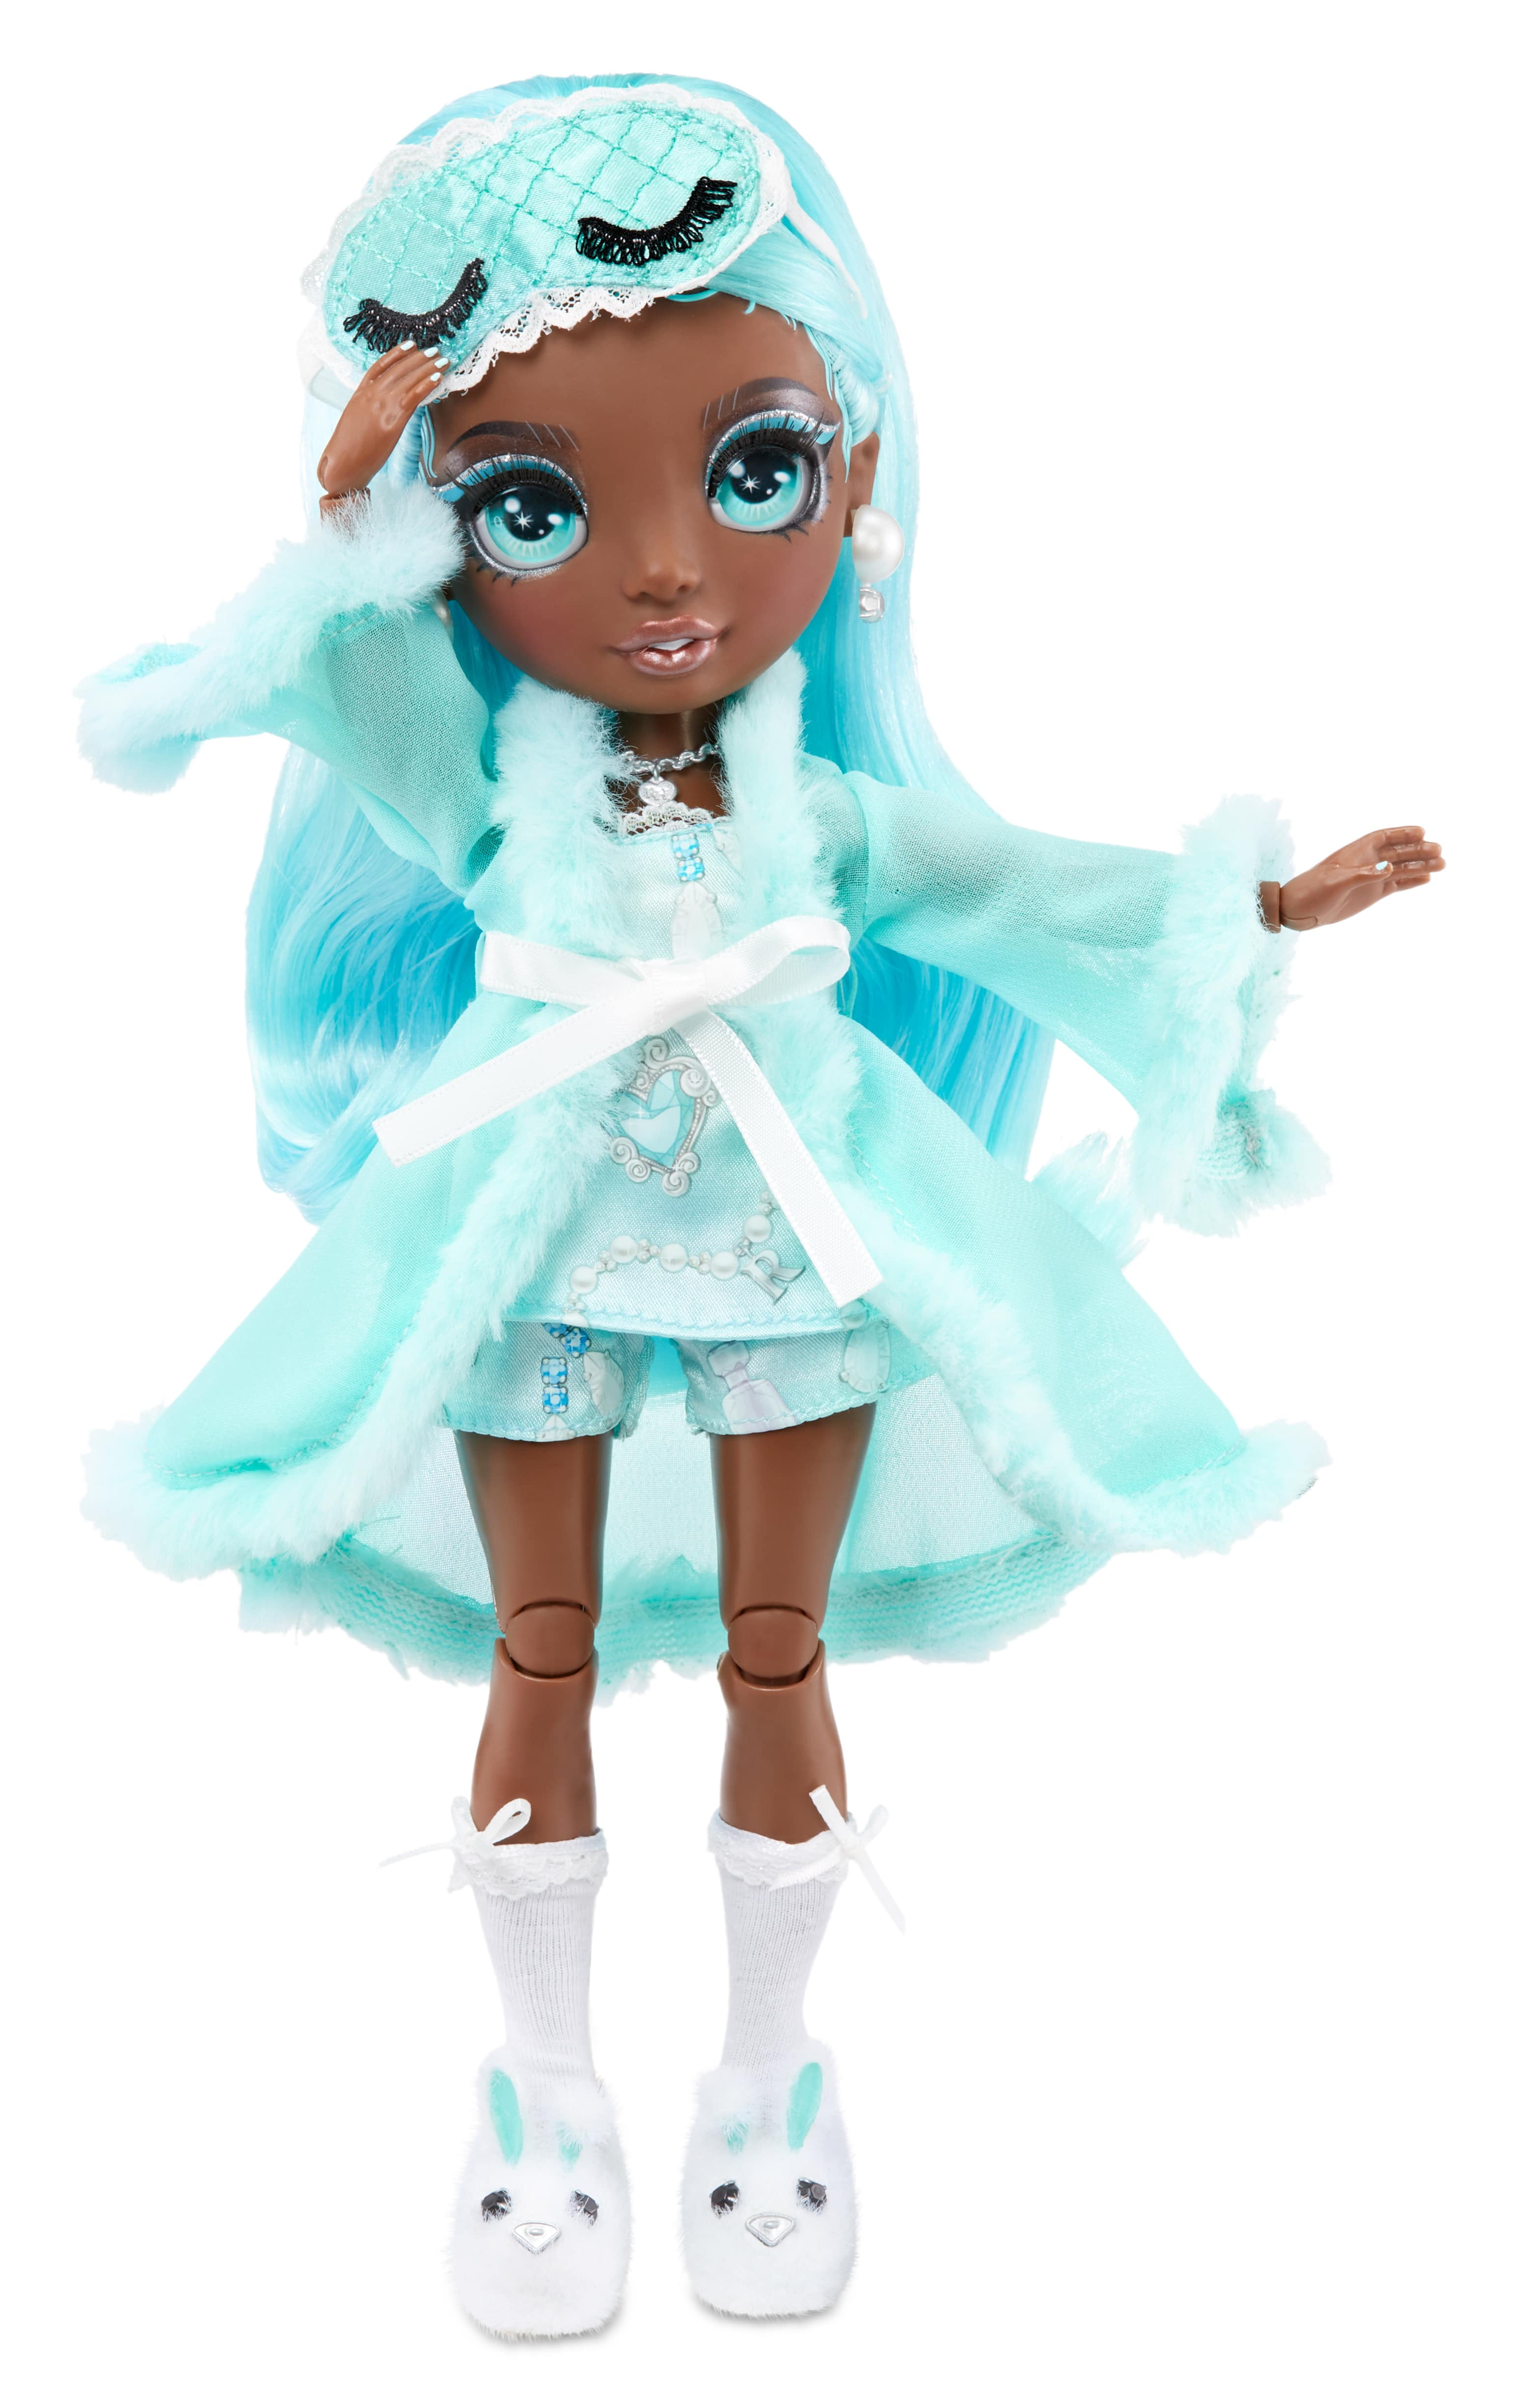 Rainbow High™ Slumber Party Robin Sterling™ – Light Blue Fashion Doll and Playset with 2 Outfits to Mix and Match, Sleeping Bag and Sleepover Doll Accessories